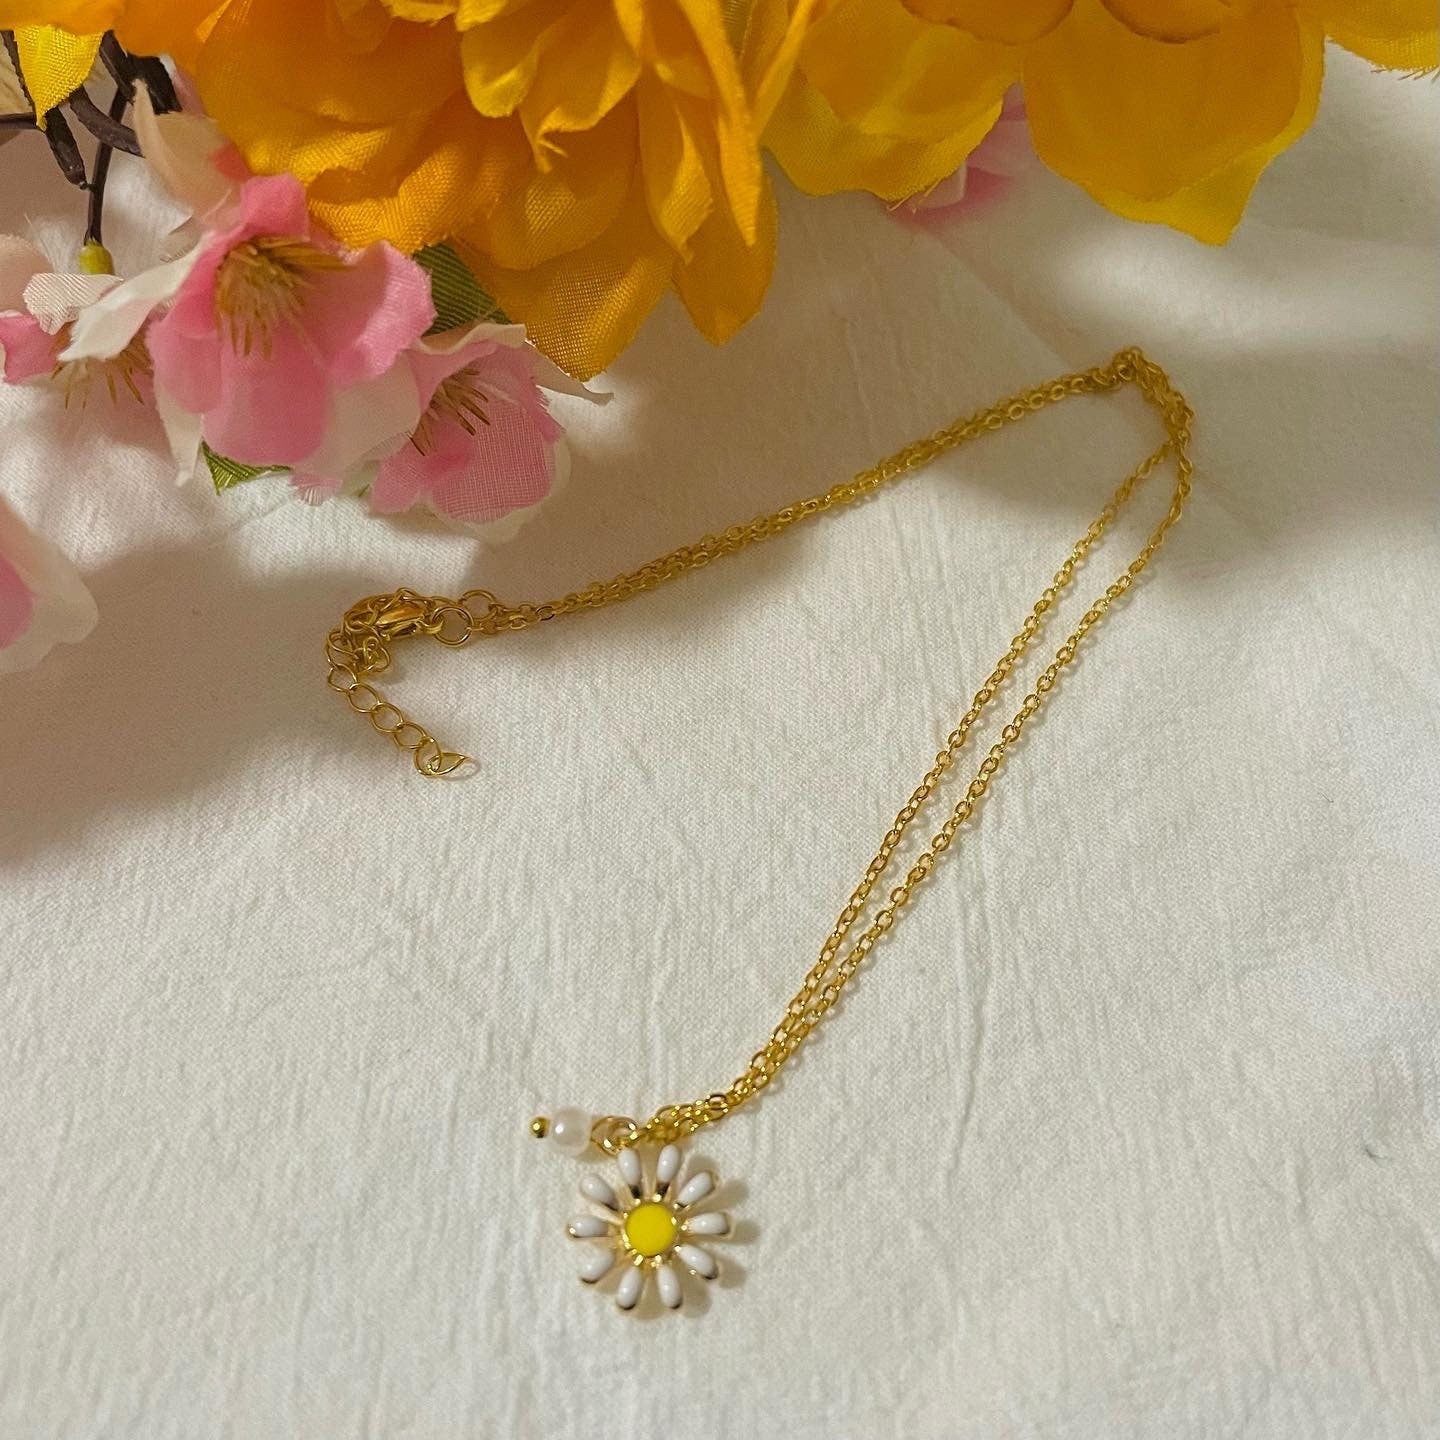 Daisy Pearl Necklace